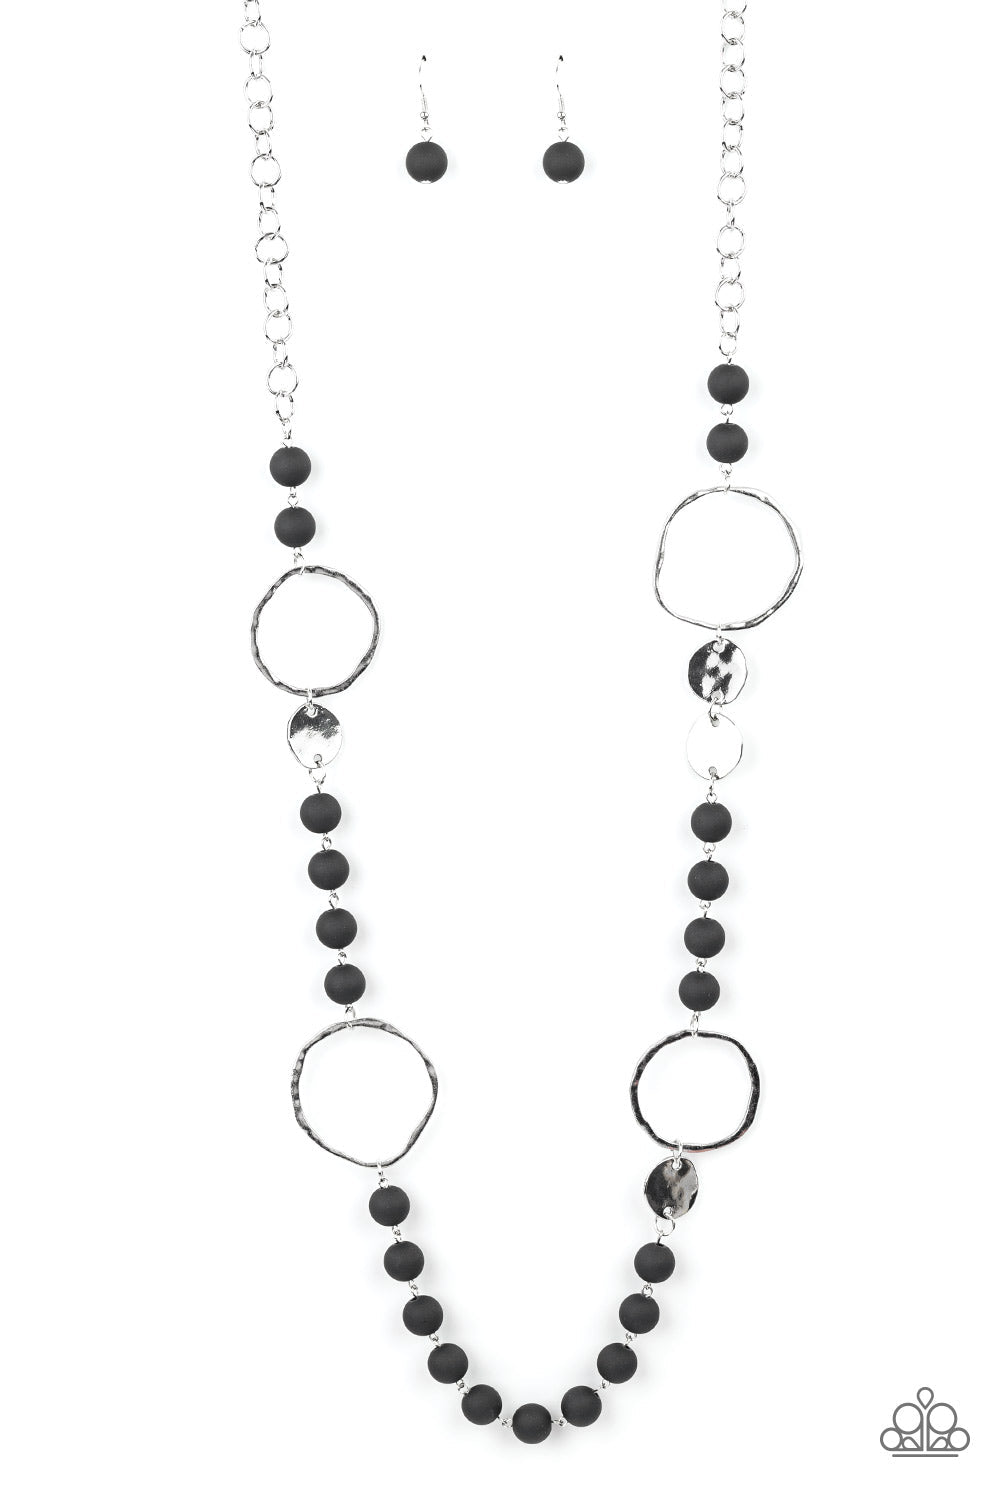 Sea Glass Wanderer - Black and Silver Necklace - Paparazzi Accessories - Strands of basic silver links, cloudy black beads alternate with hammered silver discs and oversized rings creating a subtle seaside vibe as they fall across the chest for a stylish fashion necklace. 